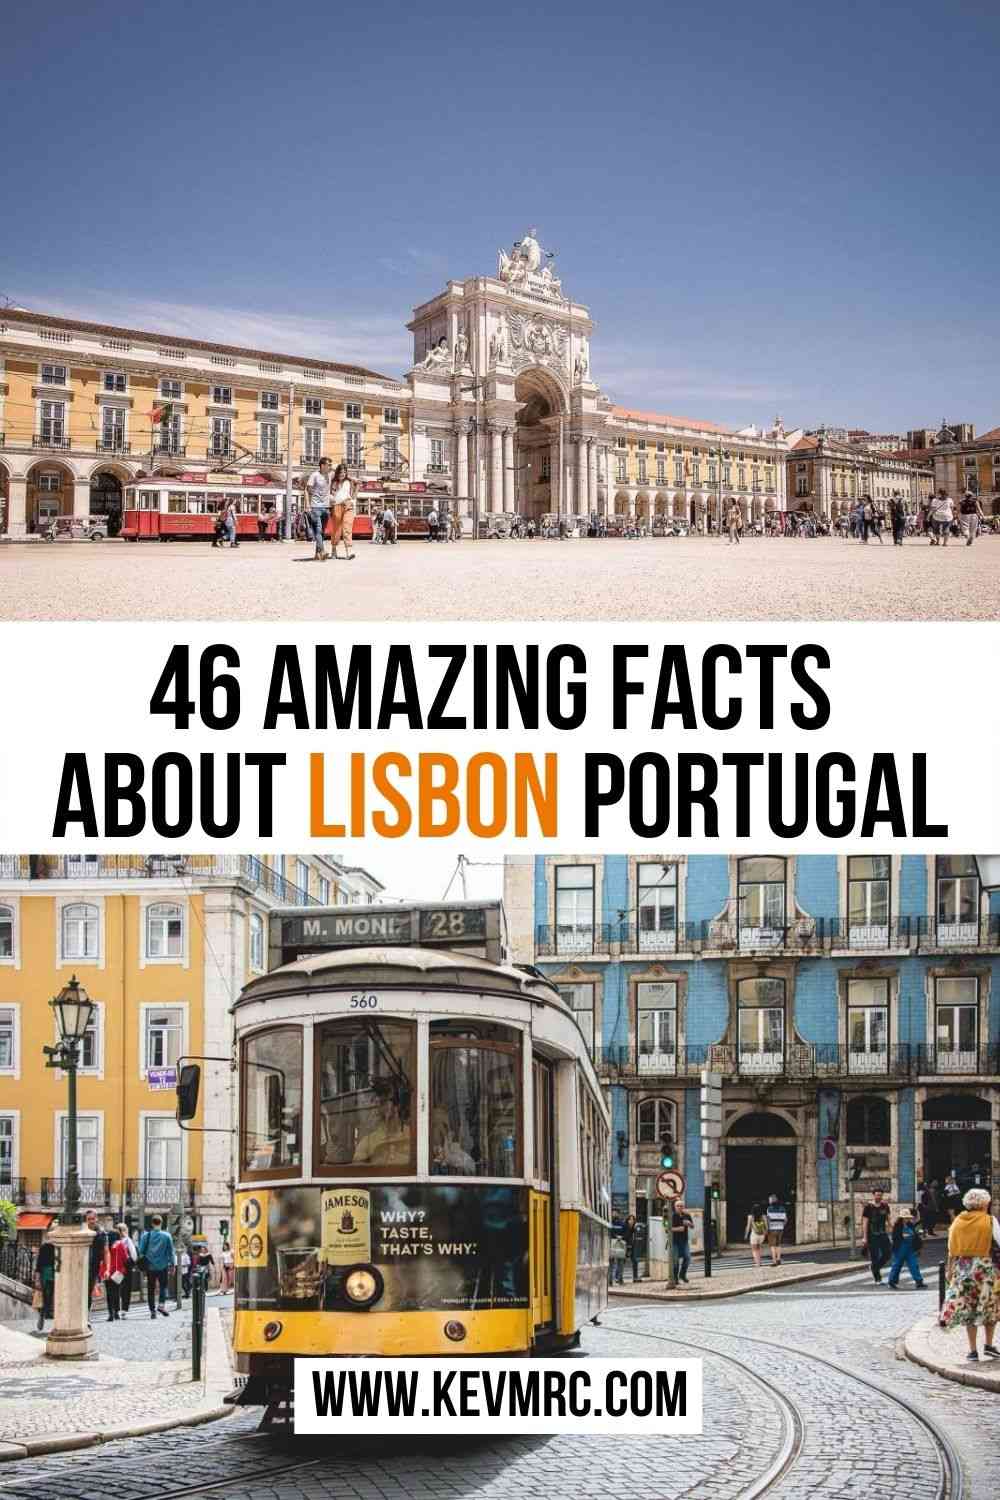 Lisbon tops the list of the most popular tourist destinations in Europe. The city of the seven hills has indeed captured the hearts of travelers from all over the world with a unique blend of tradition and modernity. Let's discover 46 interesting facts about Lisbon Portugal! #lisbon #portugal #funfacts